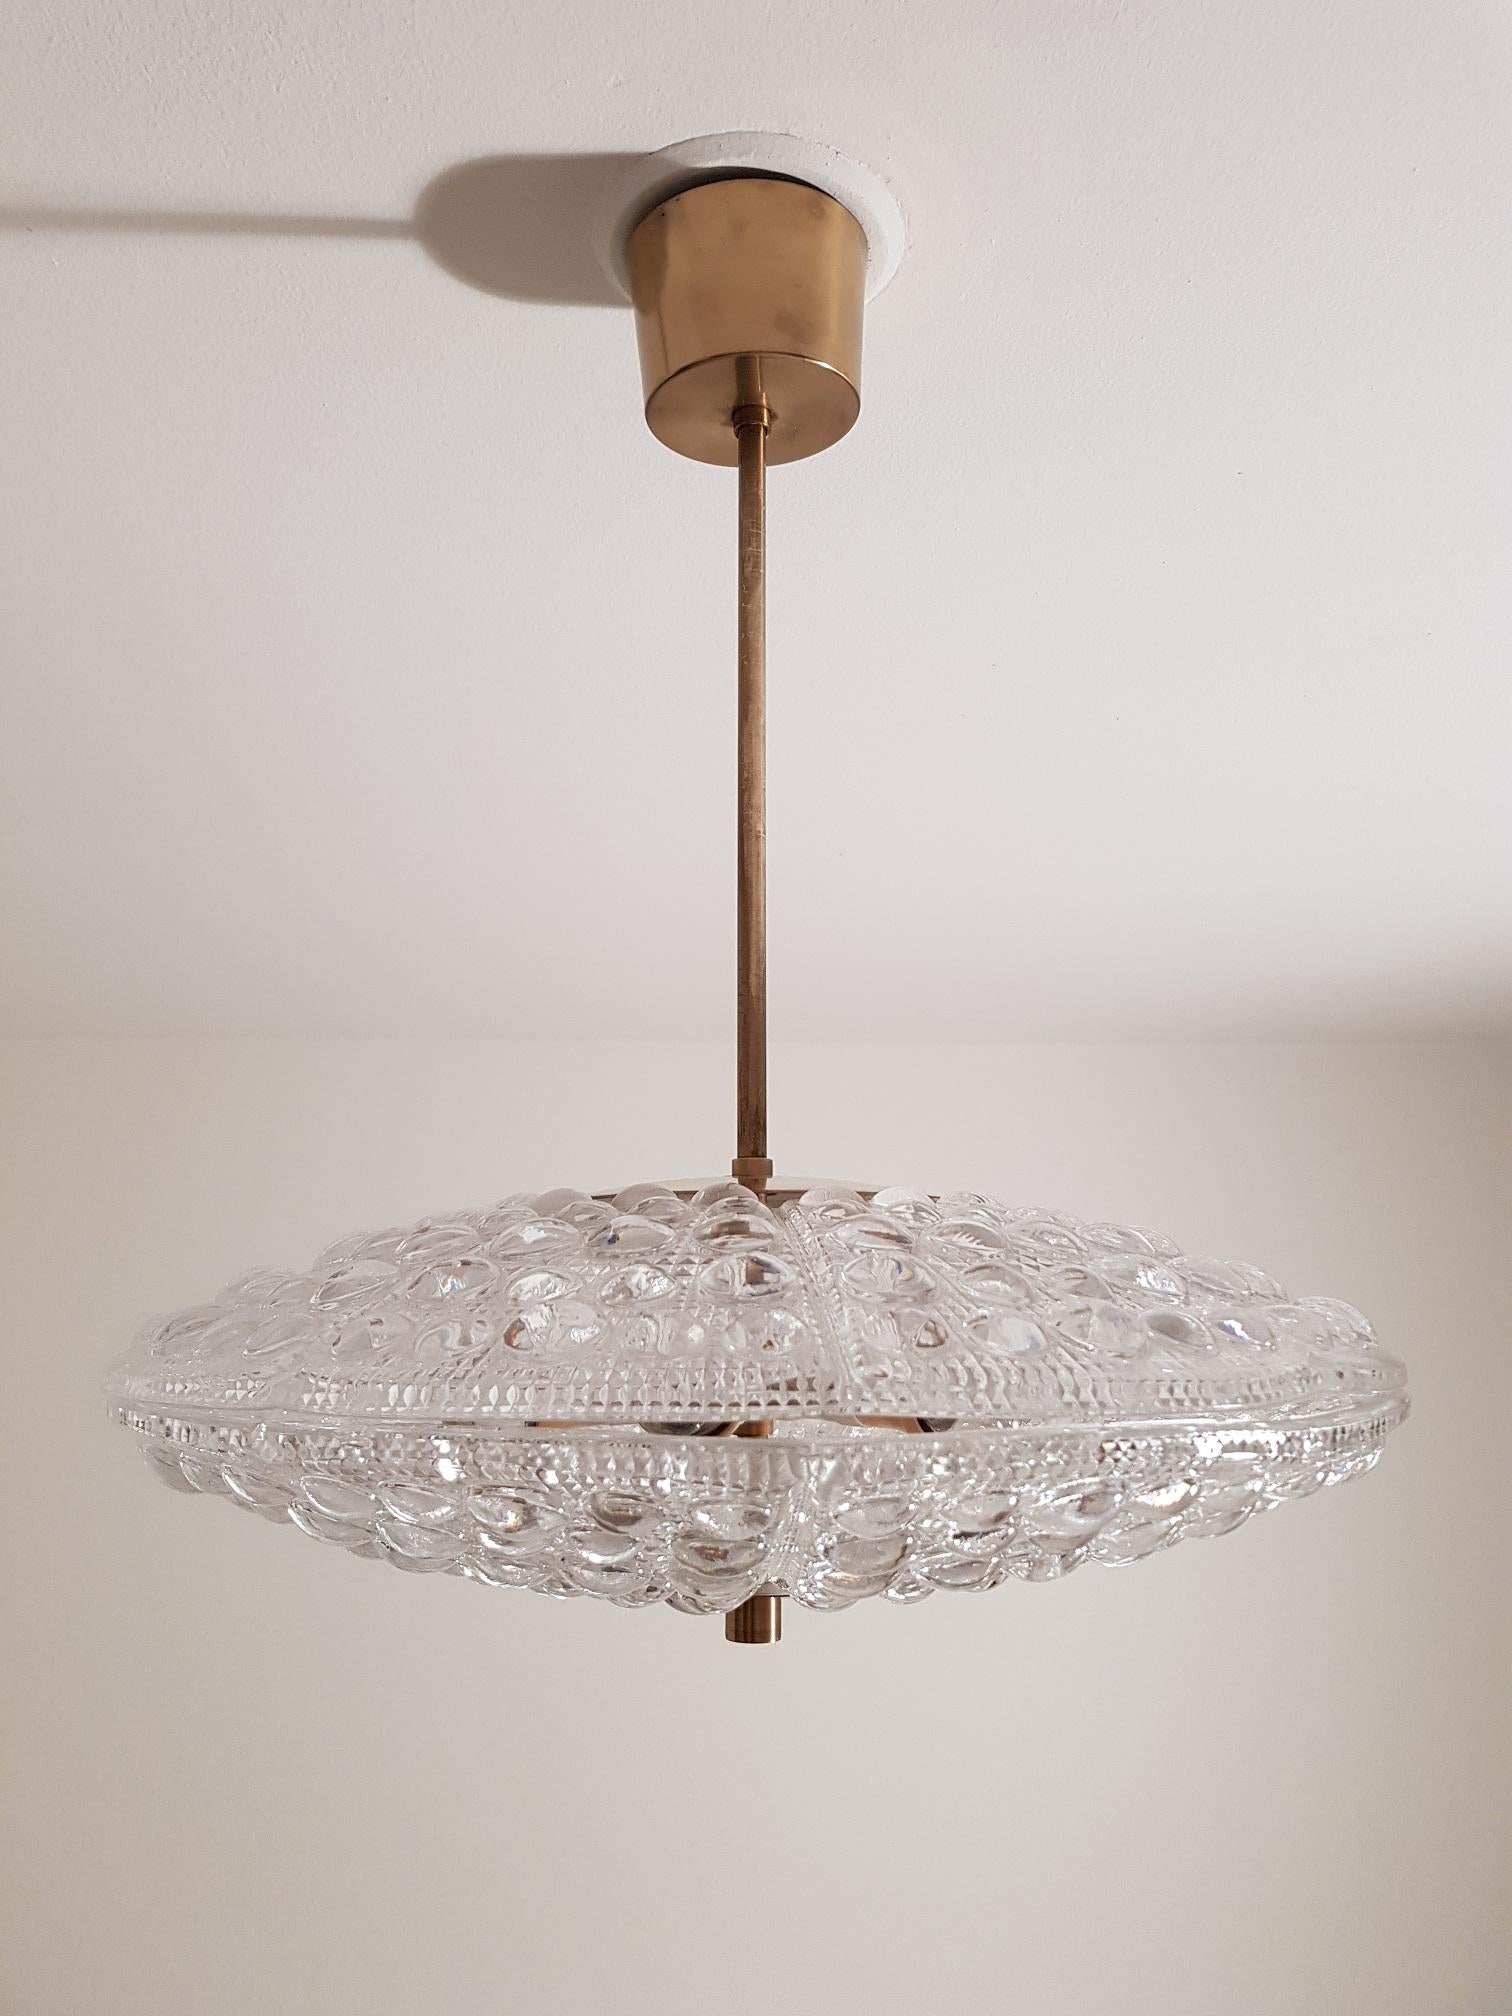 Carl Fagerlund Dual Disc Chandelier Brass and Glass 1960s, Orrefors Sweden For Sale 1